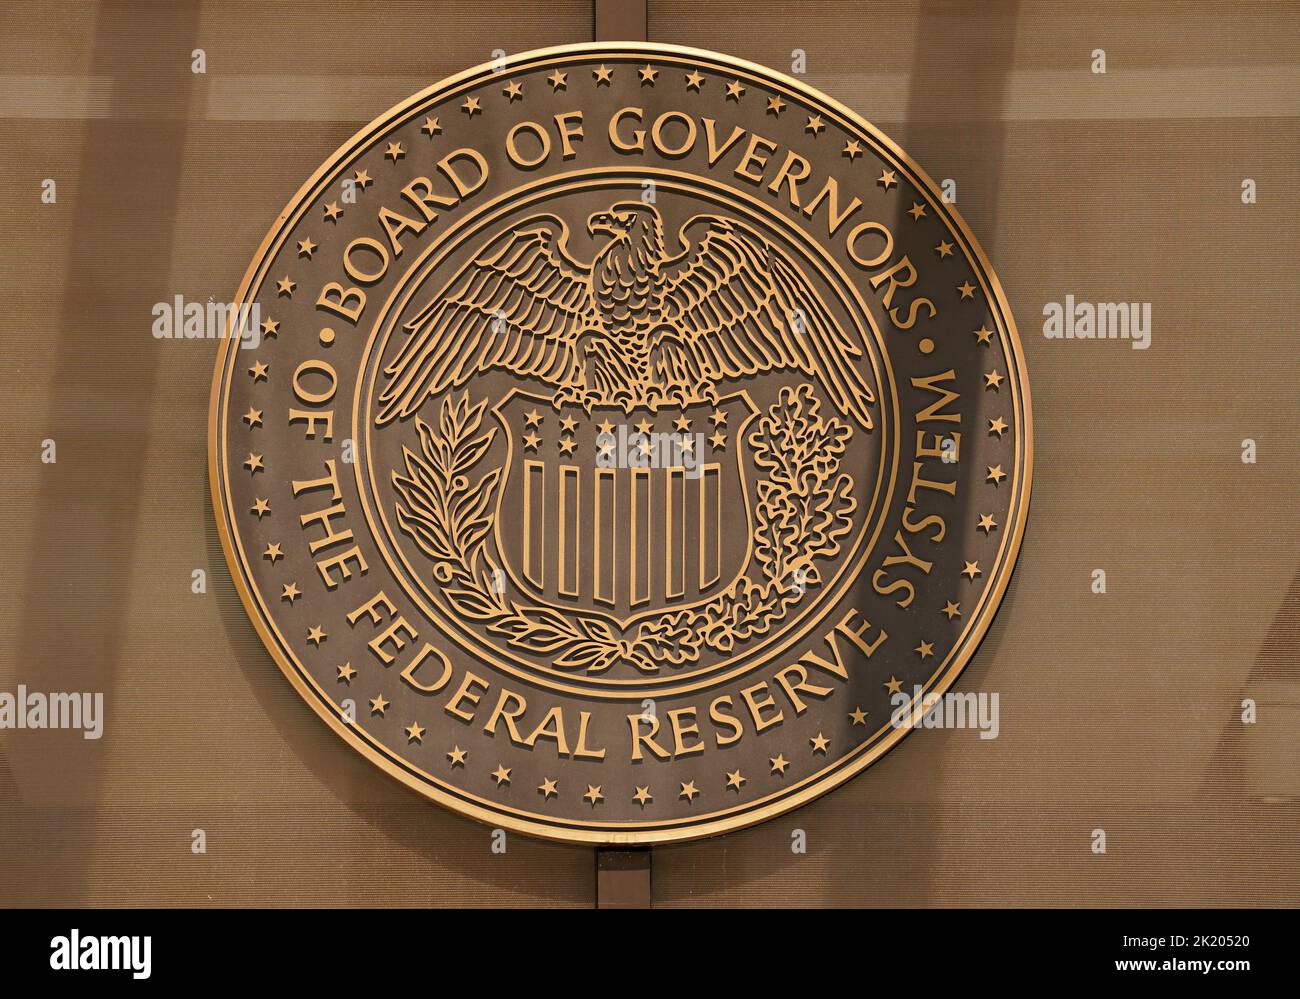 A sign for the Federal Reserve Board of Governors is seen at the entrance to the William McChesney Martin Jr. building ahead of a news conference by Federal Reserve Board Chairman Jerome Powell on interest rate policy, in Washington, U.S., September 21, 2022. REUTERS/Kevin Lamarque Stock Photo